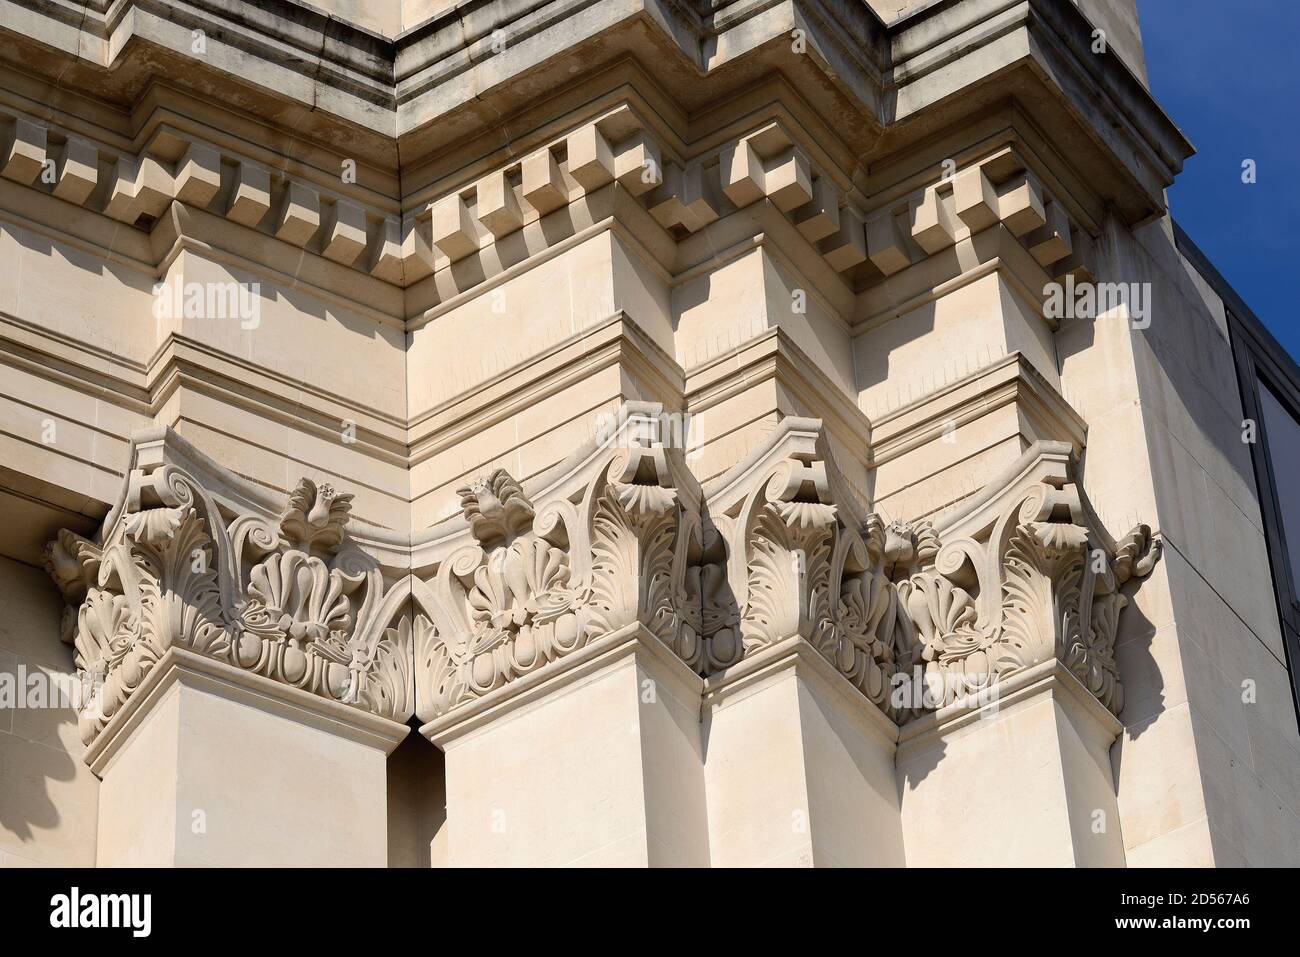 London, England, UK. Sainsbury Wing (1991) of the National Gallery - detail of the Portland stone Corinthain style classical column capitals Stock Photo